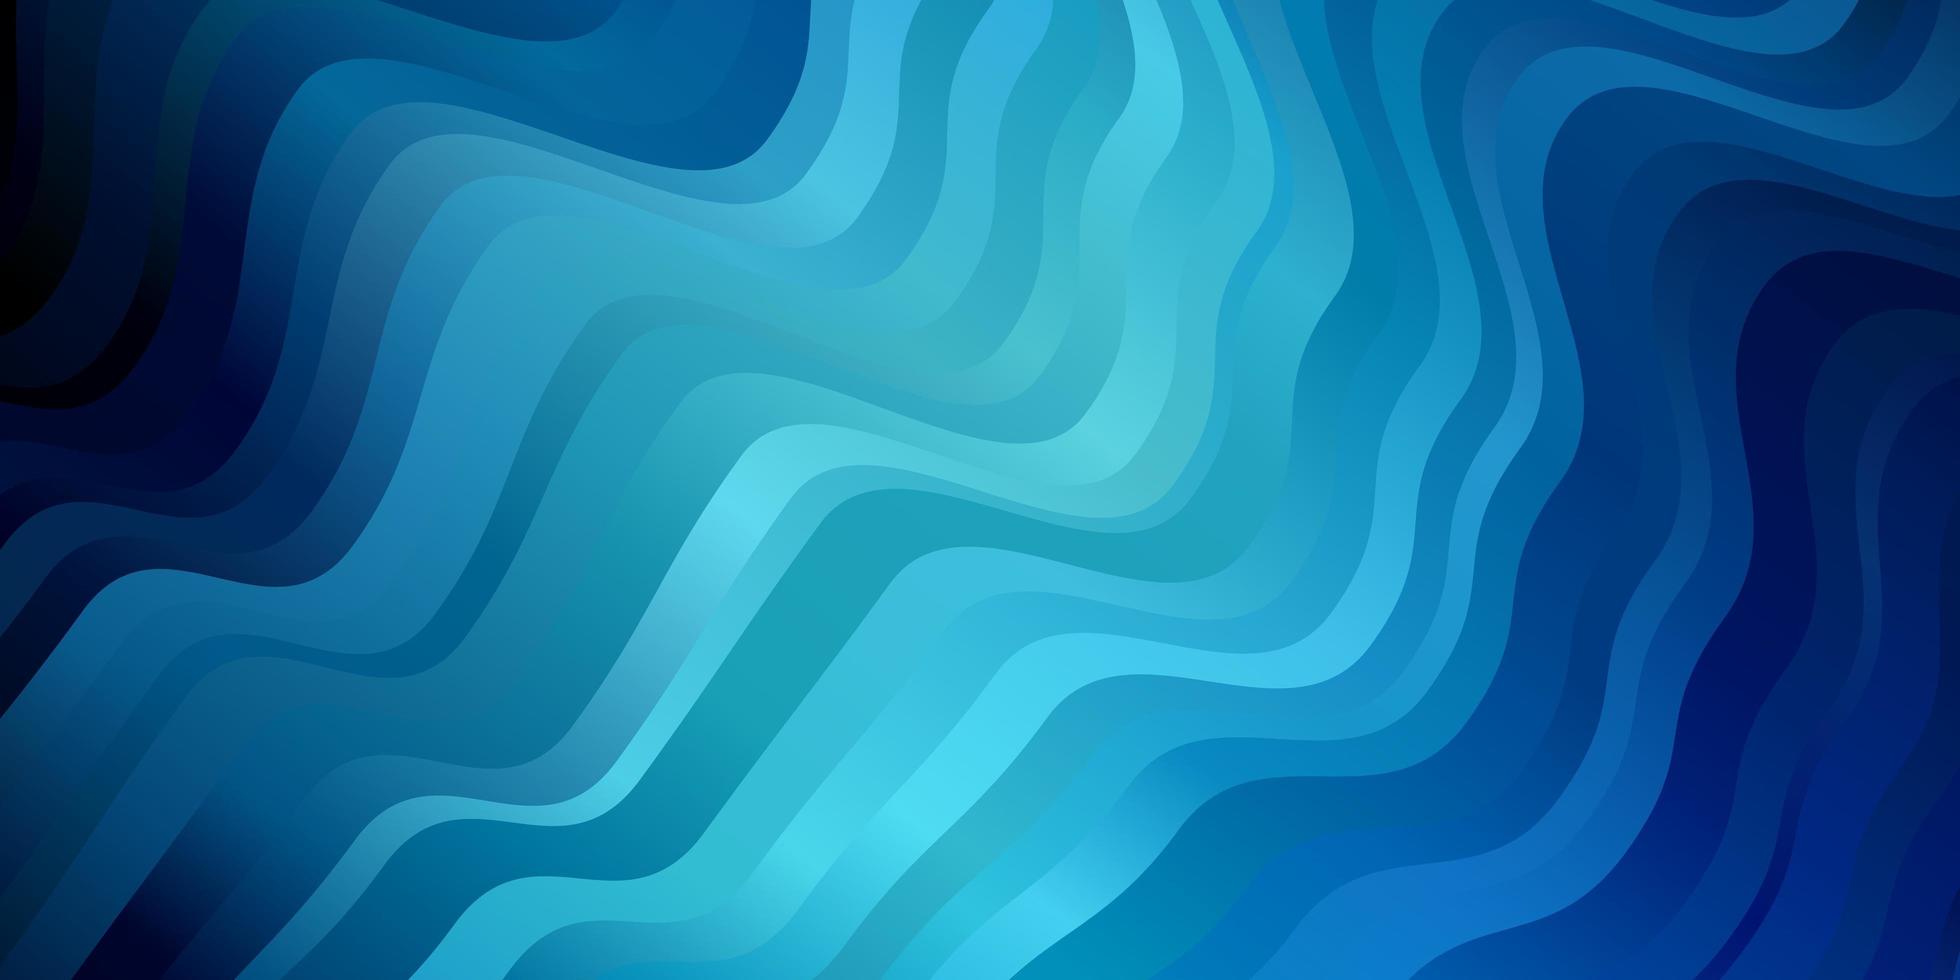 Blue curves background vector